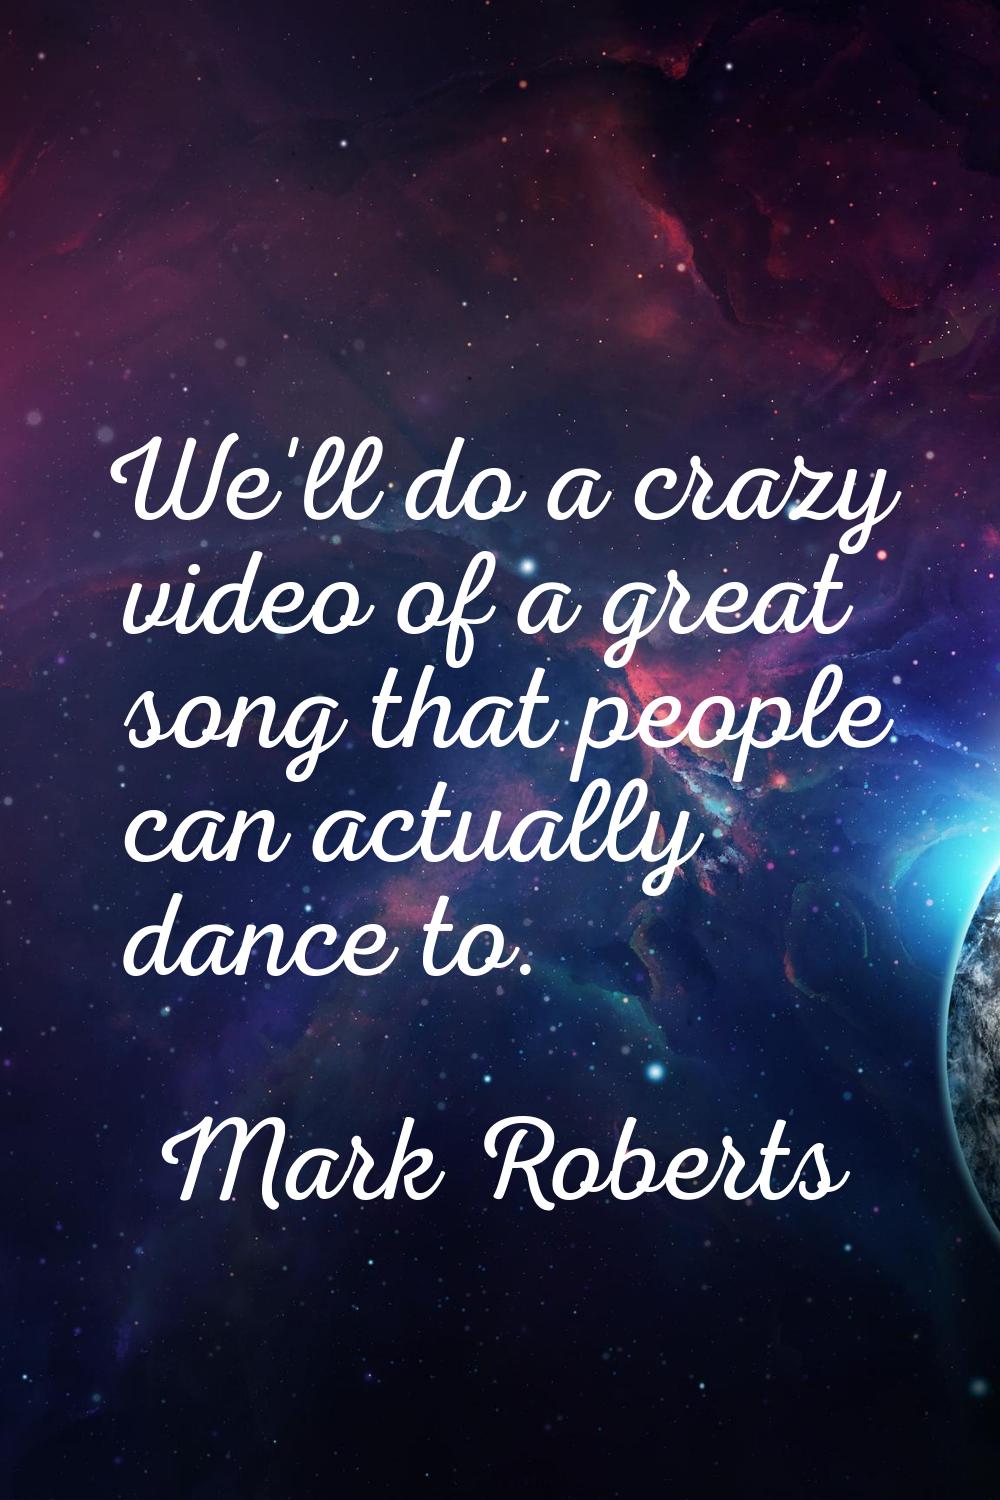 We'll do a crazy video of a great song that people can actually dance to.